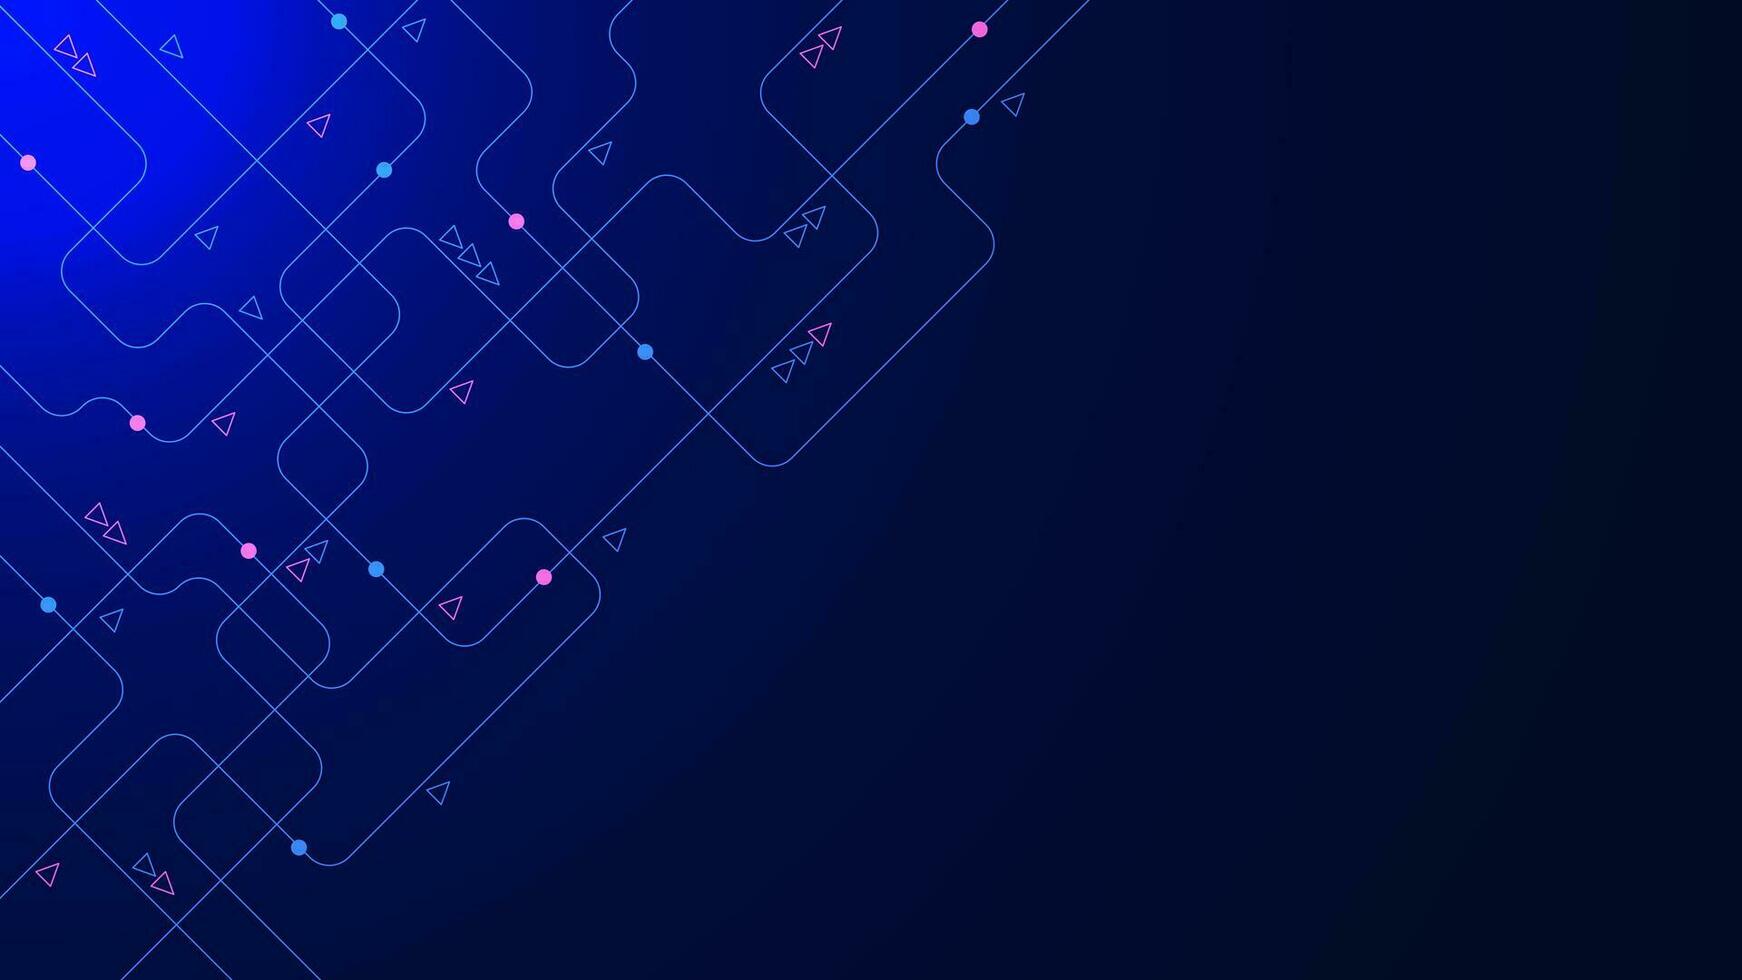 Geometric circuit technology connect dots and lines. Network connection and digital communication technology concept on dark blue background. Vector illustration.